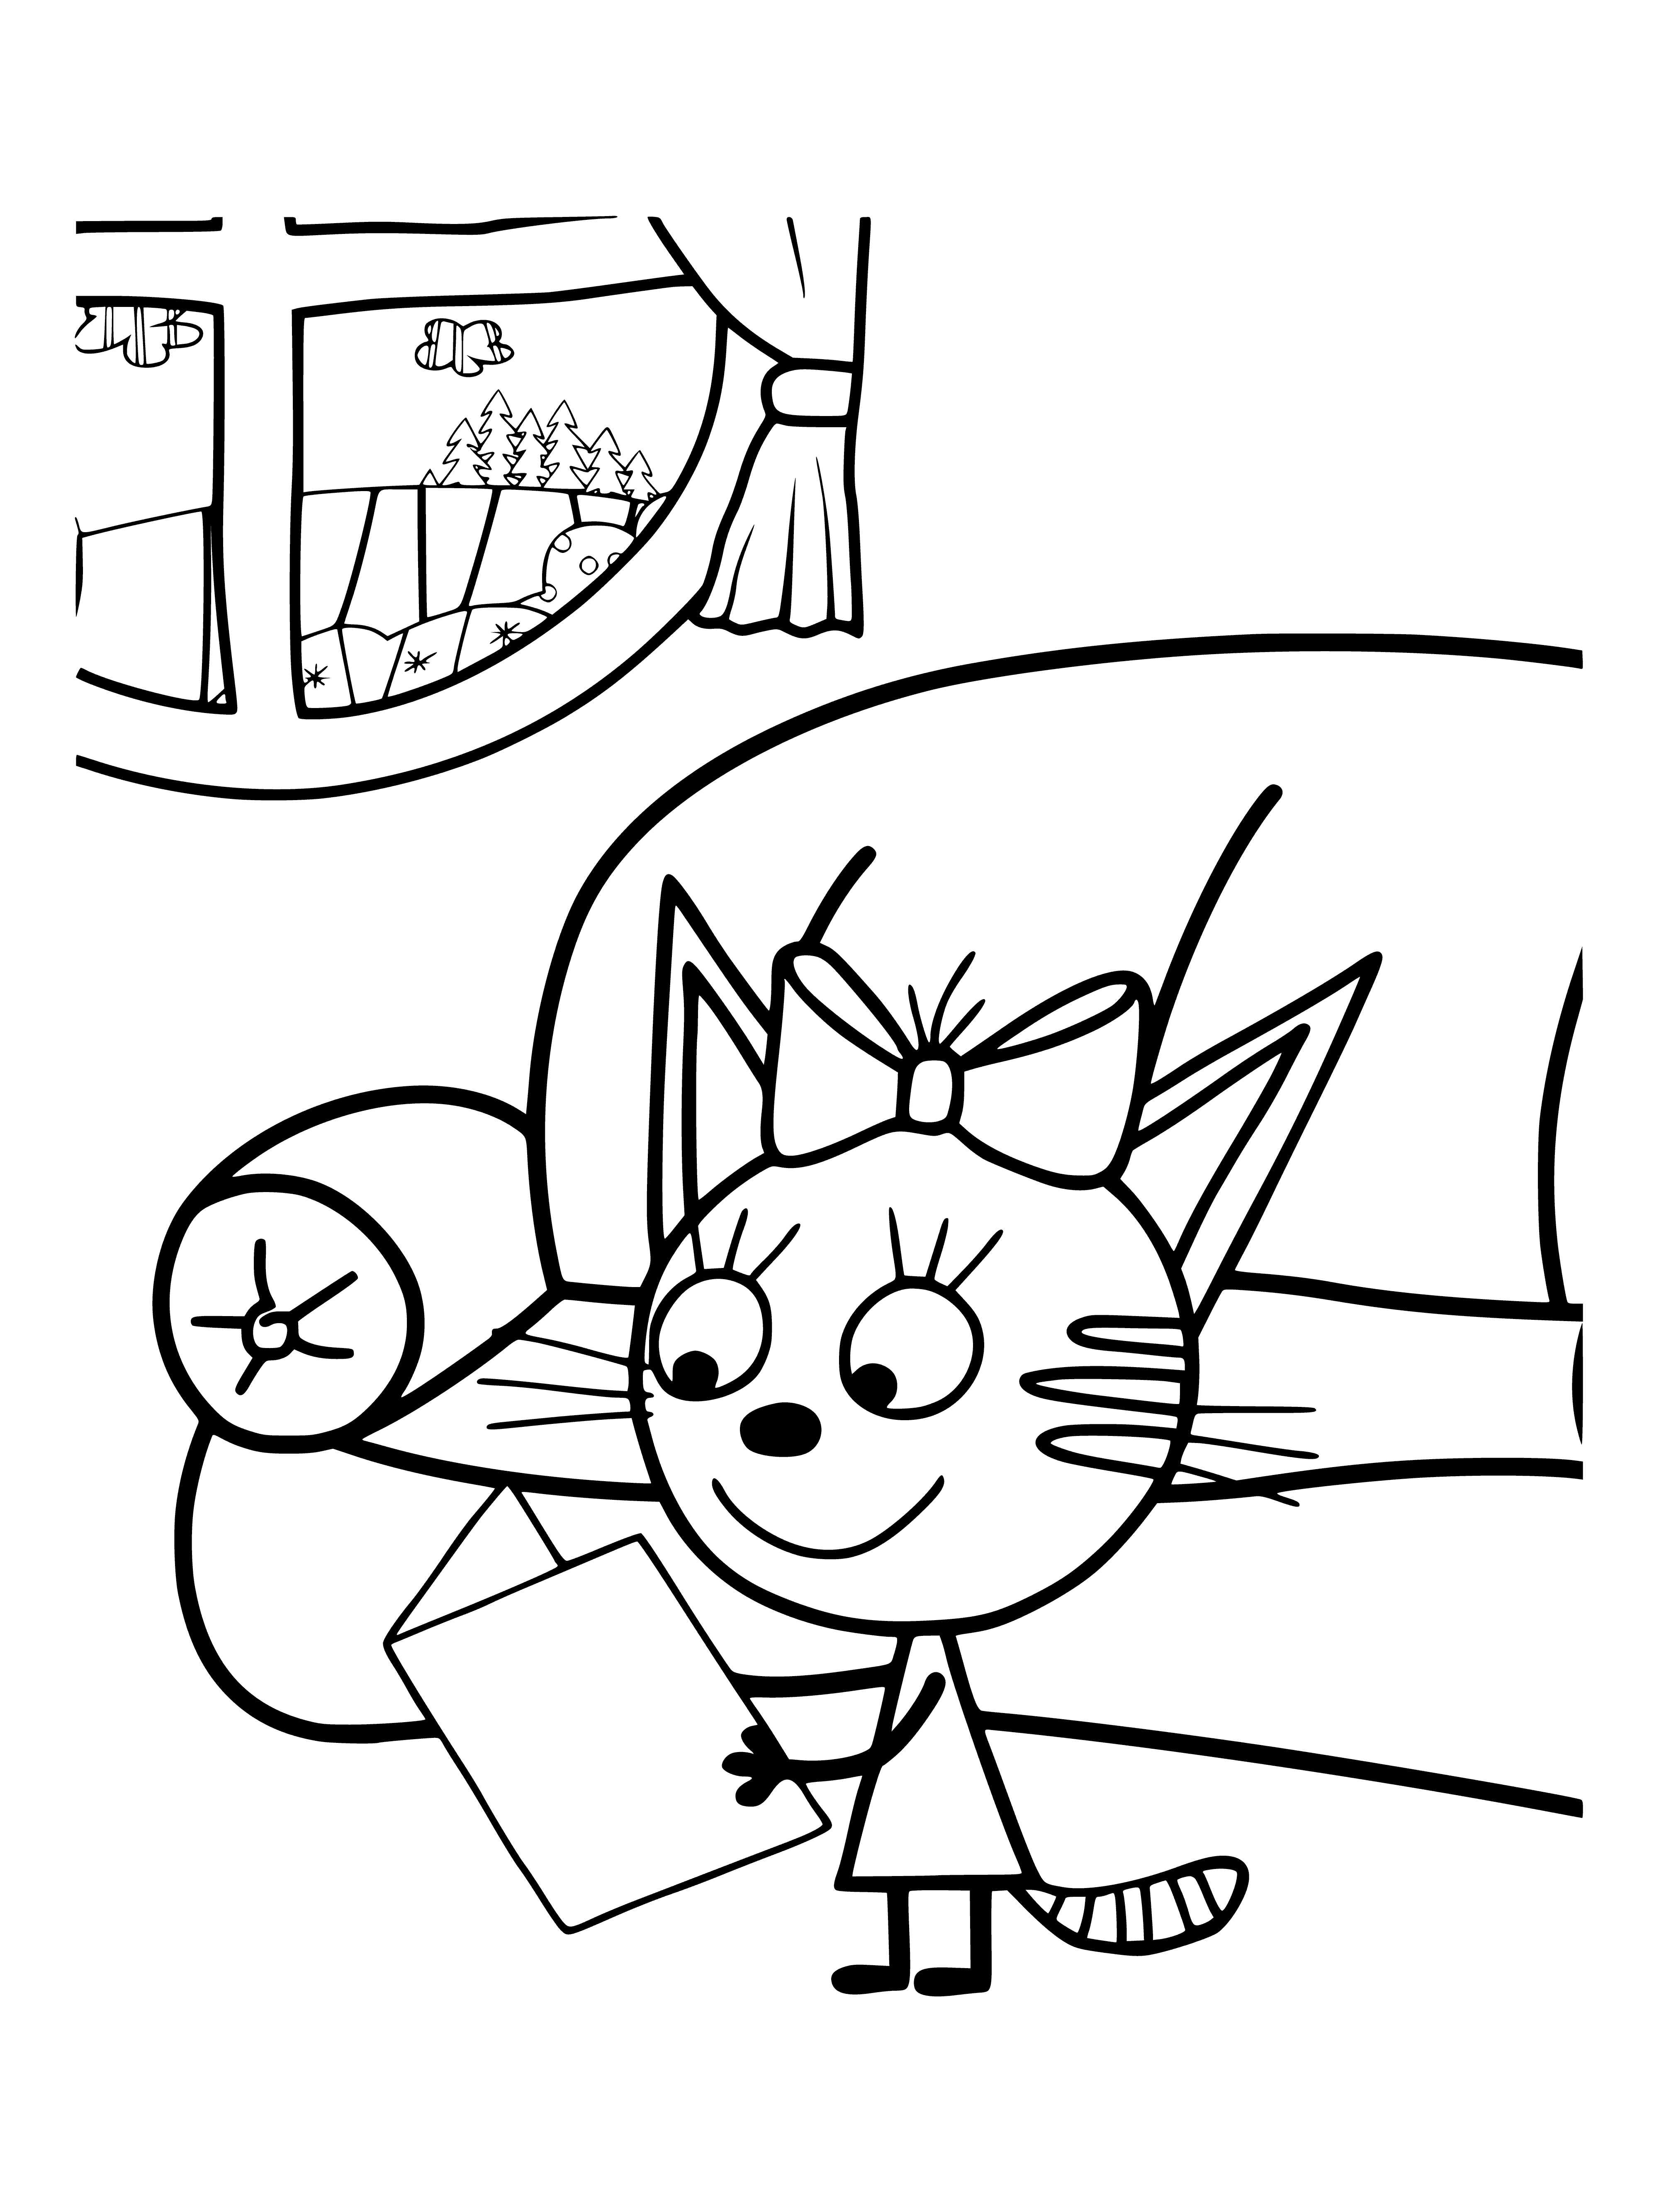 coloring page: Caramel is a light/dark brown striped cat with large green eyes & pink nose. Sitting in a green field with tall grass, her right ear has a white tip.